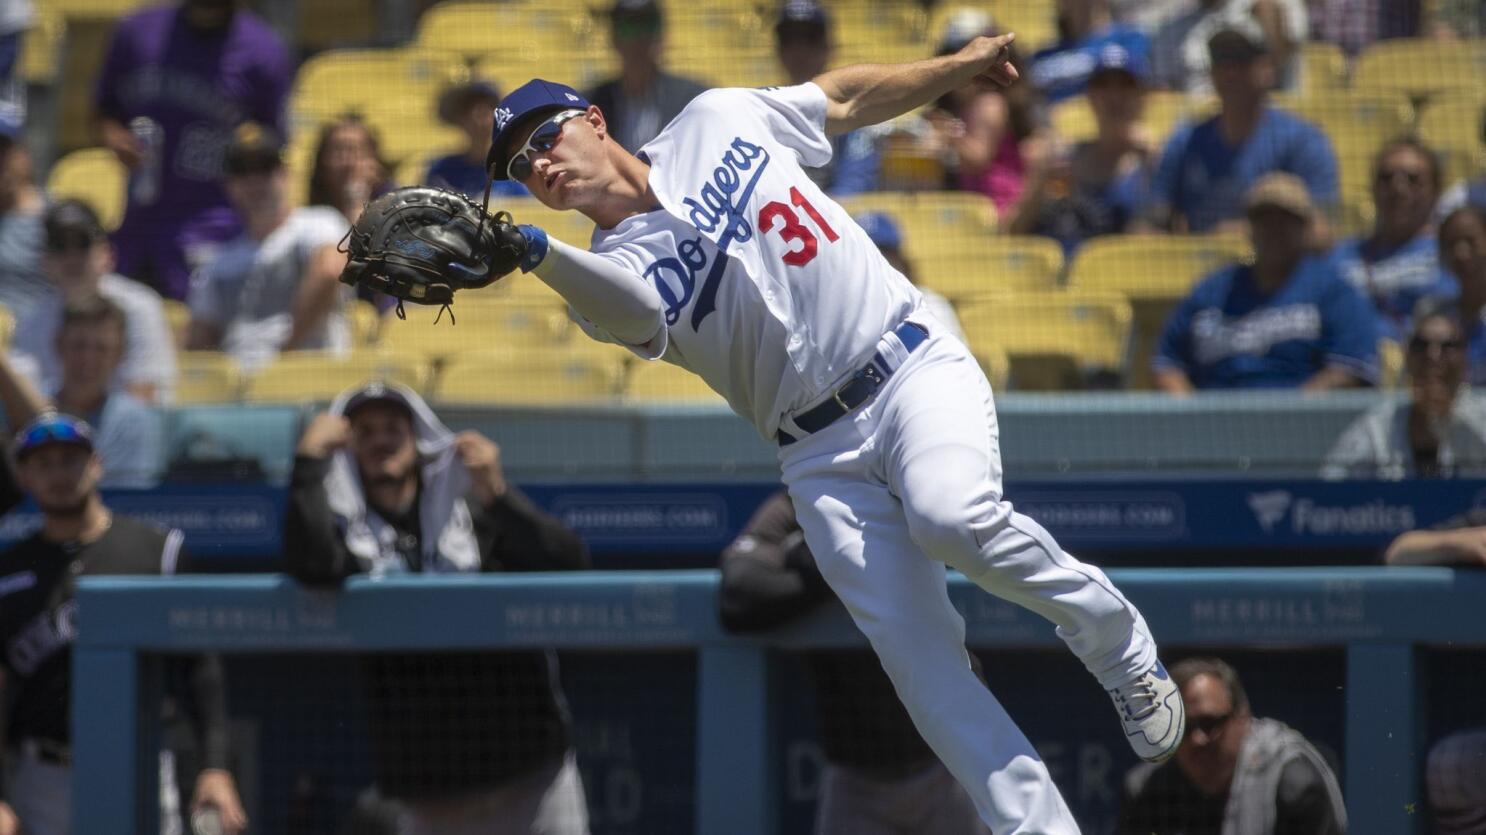 Dodgers' Joc Pederson mercifully won't play first base any more